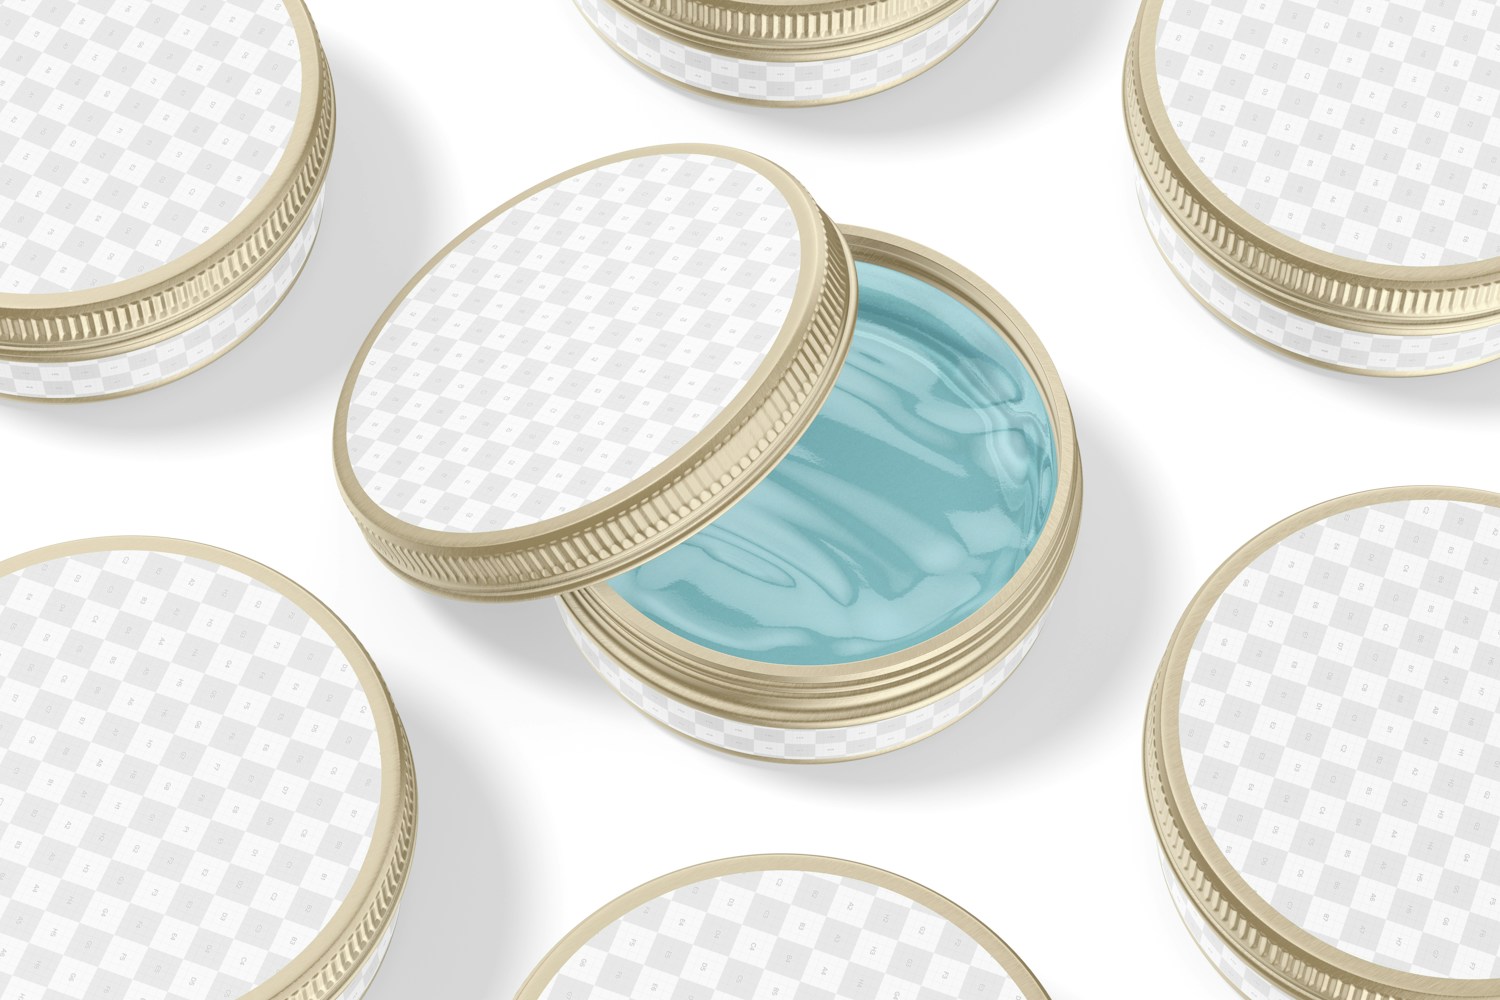 Hair Style Wax Tins Mockup, Opened and Closed